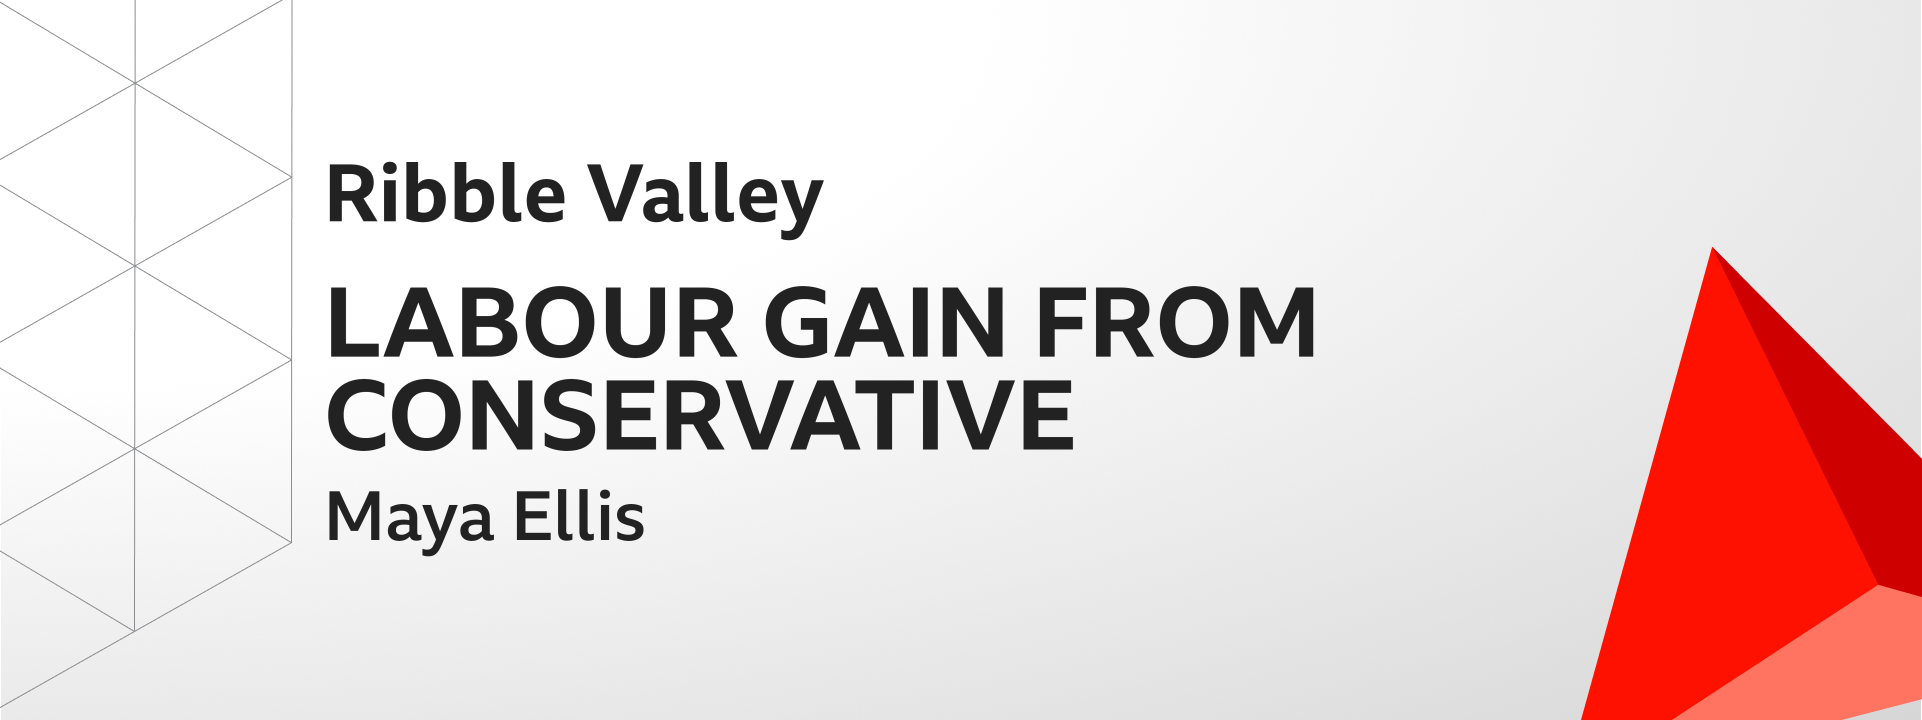 Graphic showing Labour gains Ribble Valley from the Conservatives. The winning candidate was Maya Ellis.